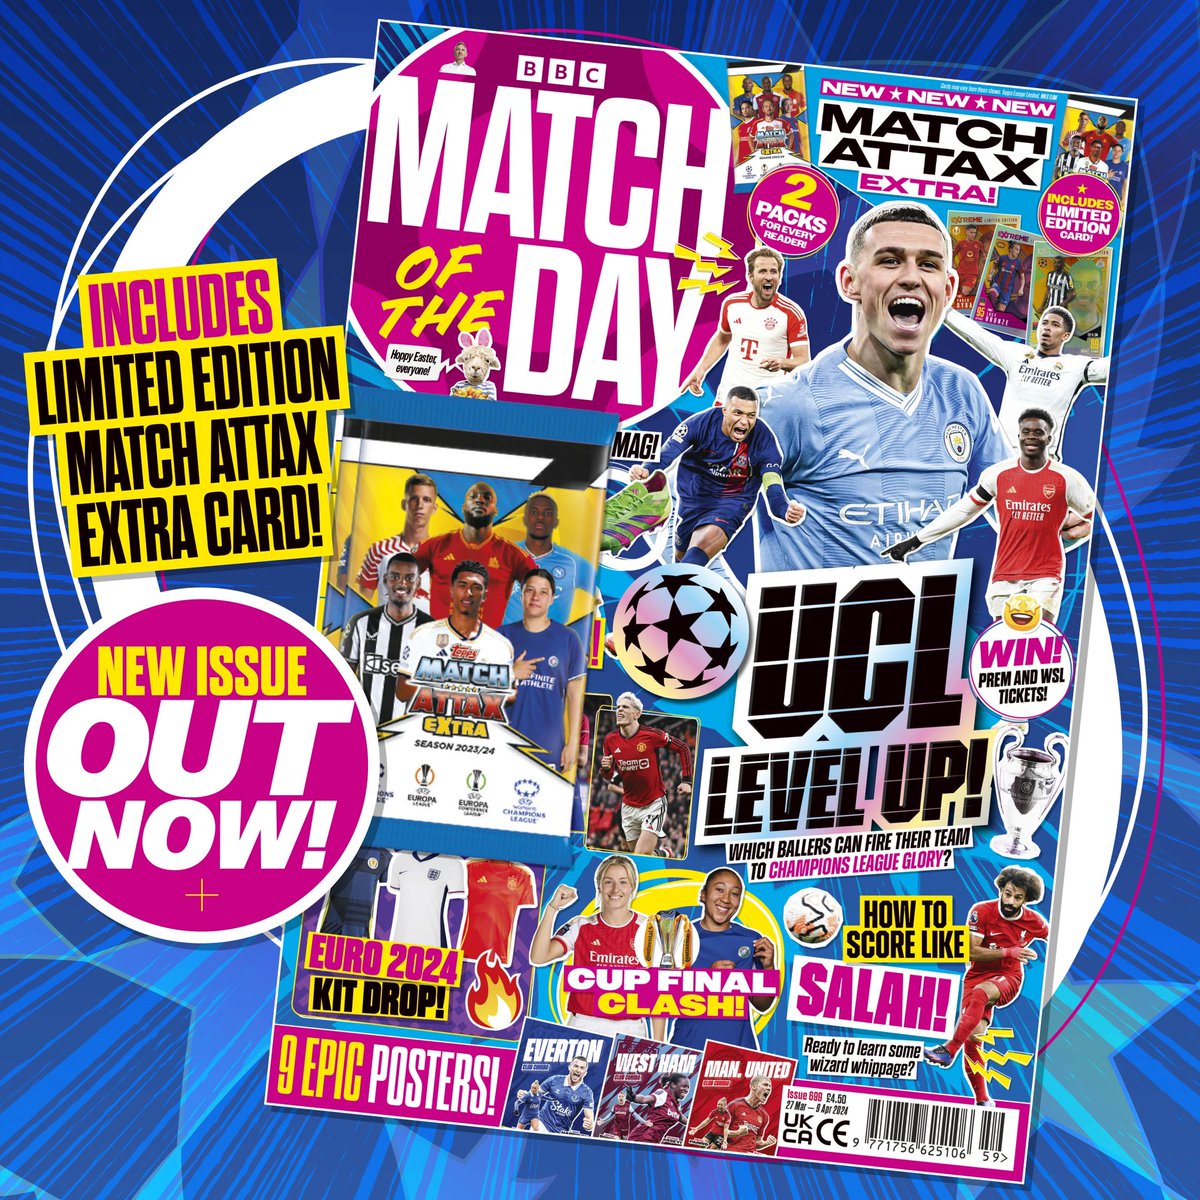 🏆🕹️ 𝑼𝑪𝑳 𝑳𝑬𝑽𝑬𝑳 𝑼𝑷! 🕹️🏆 ⬇️ Inside our new issue… 👑 Champions League game-changers! 🔥 New boots and kits! 😱 Win Prem and WSL tickets! 🤣 Bags of LOLs and quizzes! Plus TWO packs of @ToppsMatchAttax Extra - including a Limited Edition! 👀 OUT NOW! 👀